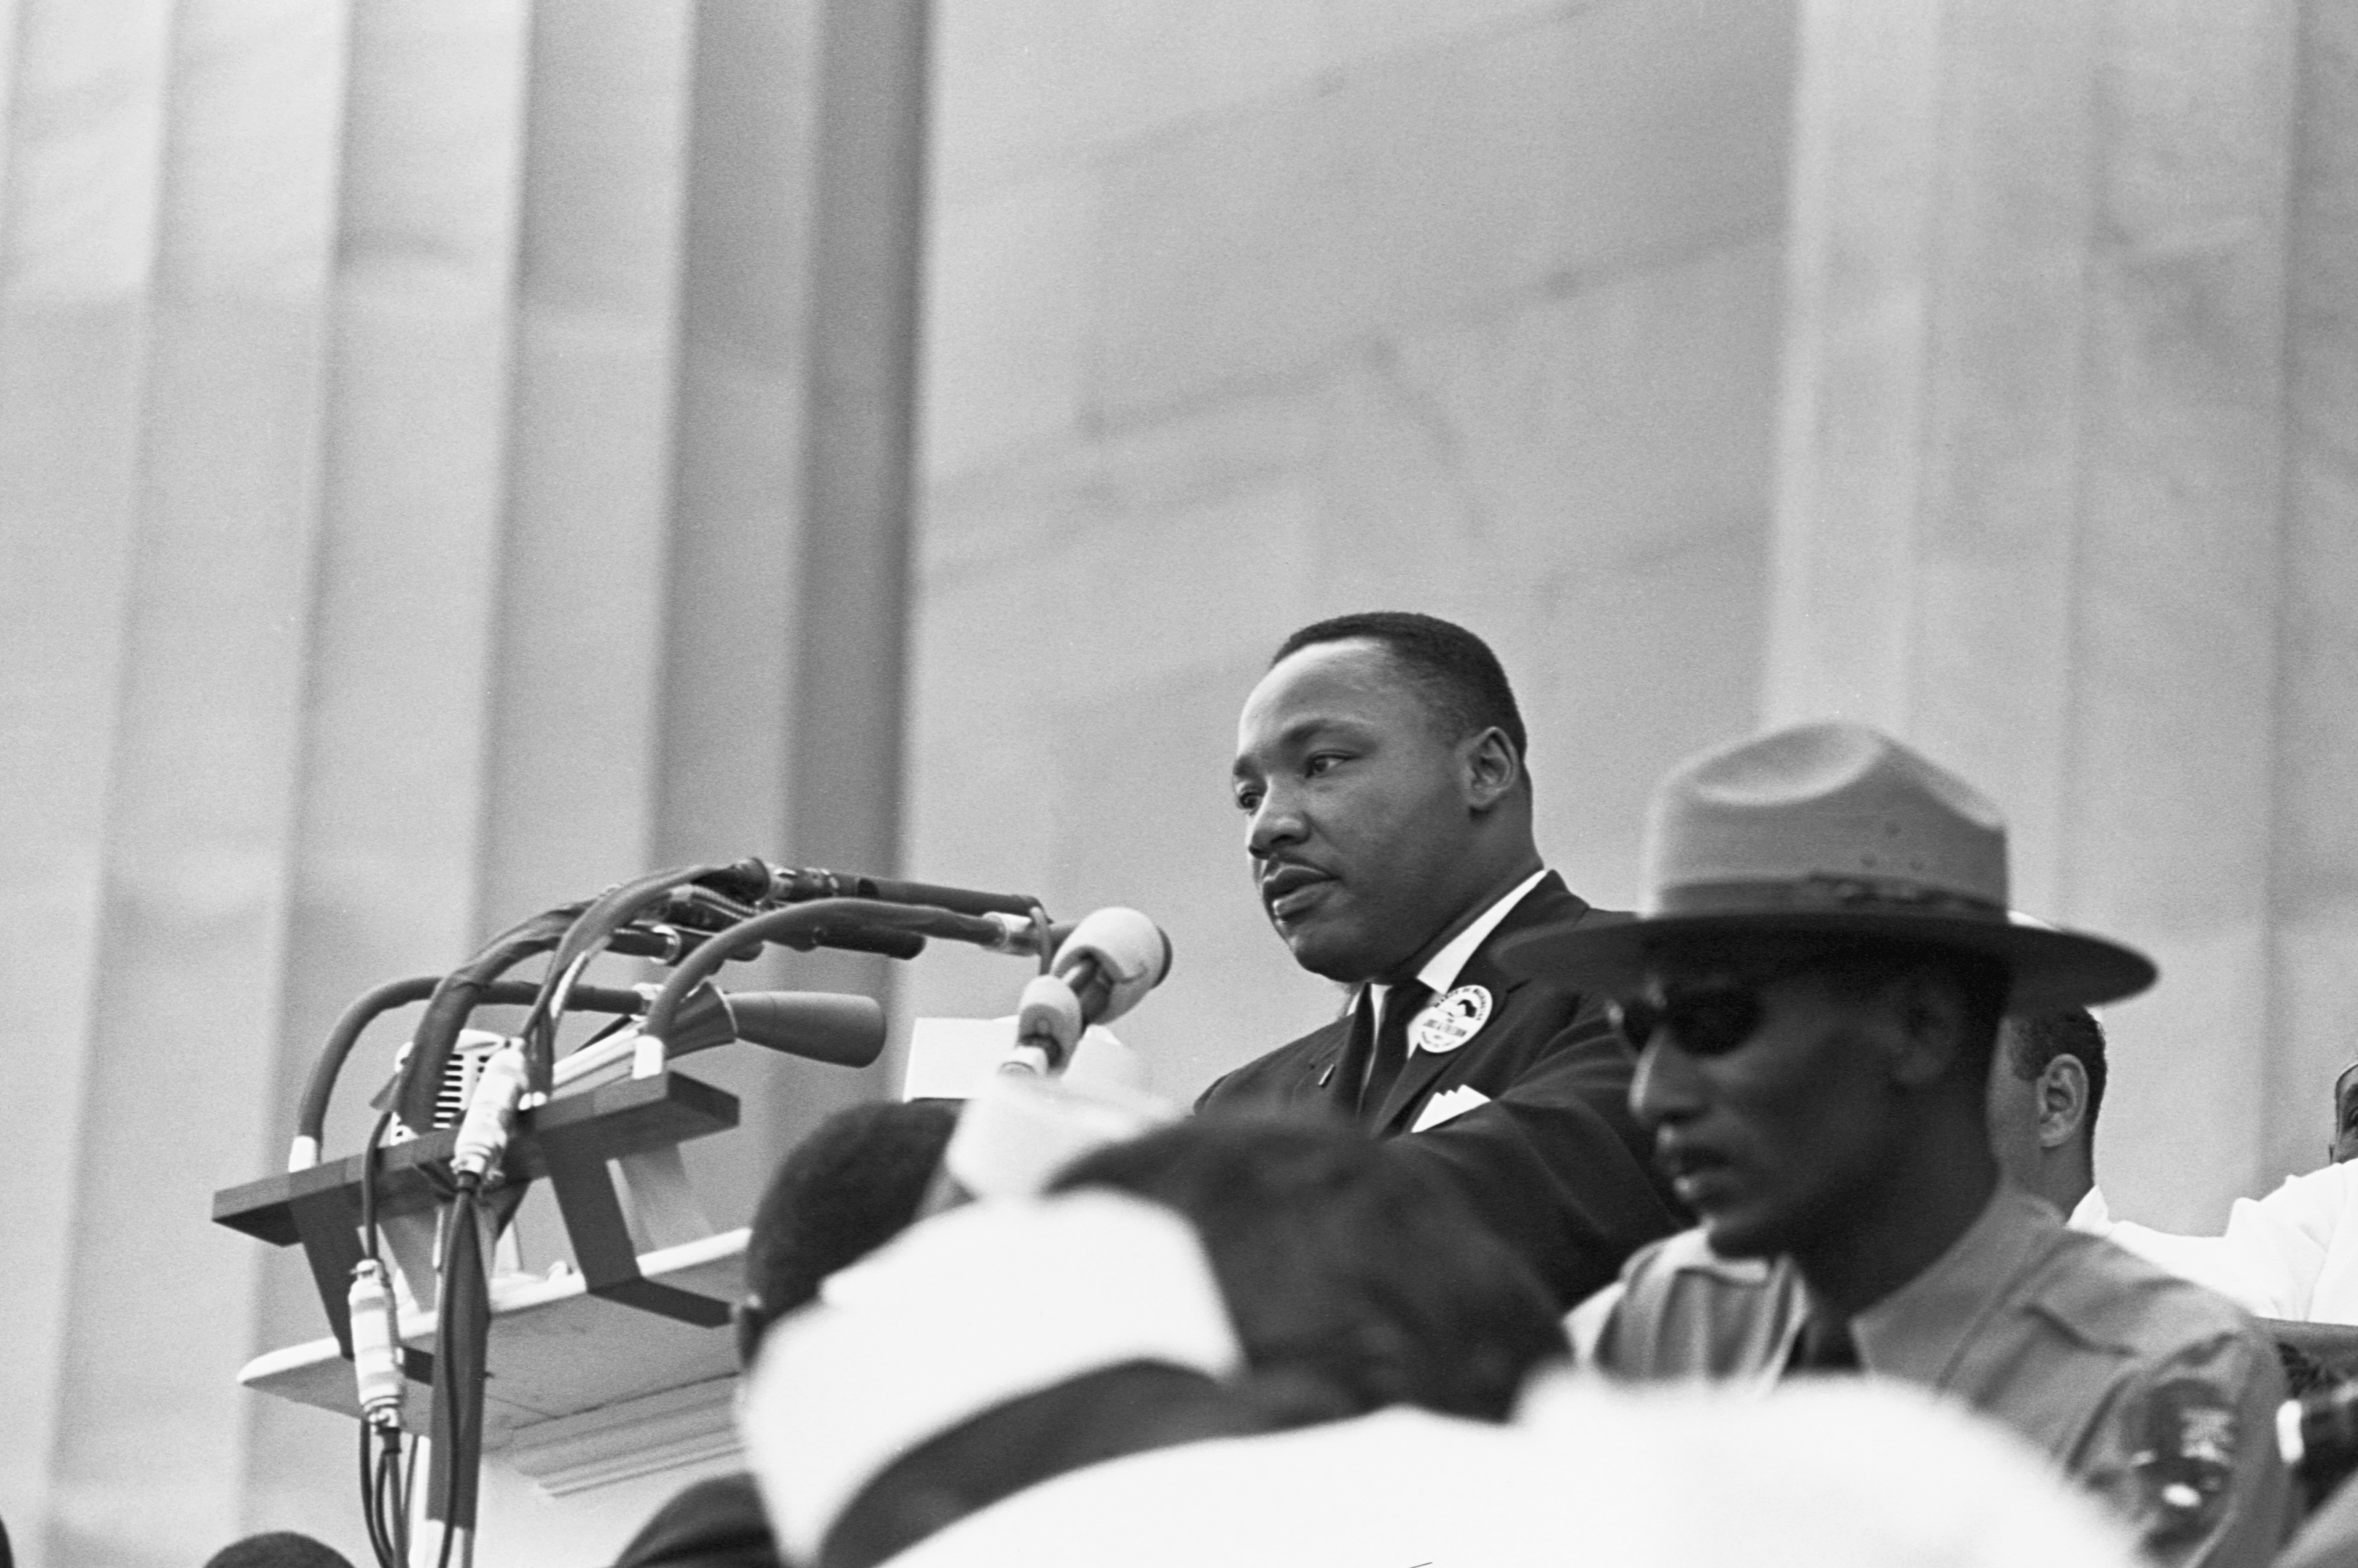 martin-luther-king-gave-i-have-a-dream-speech-55-years-ago-insidehook